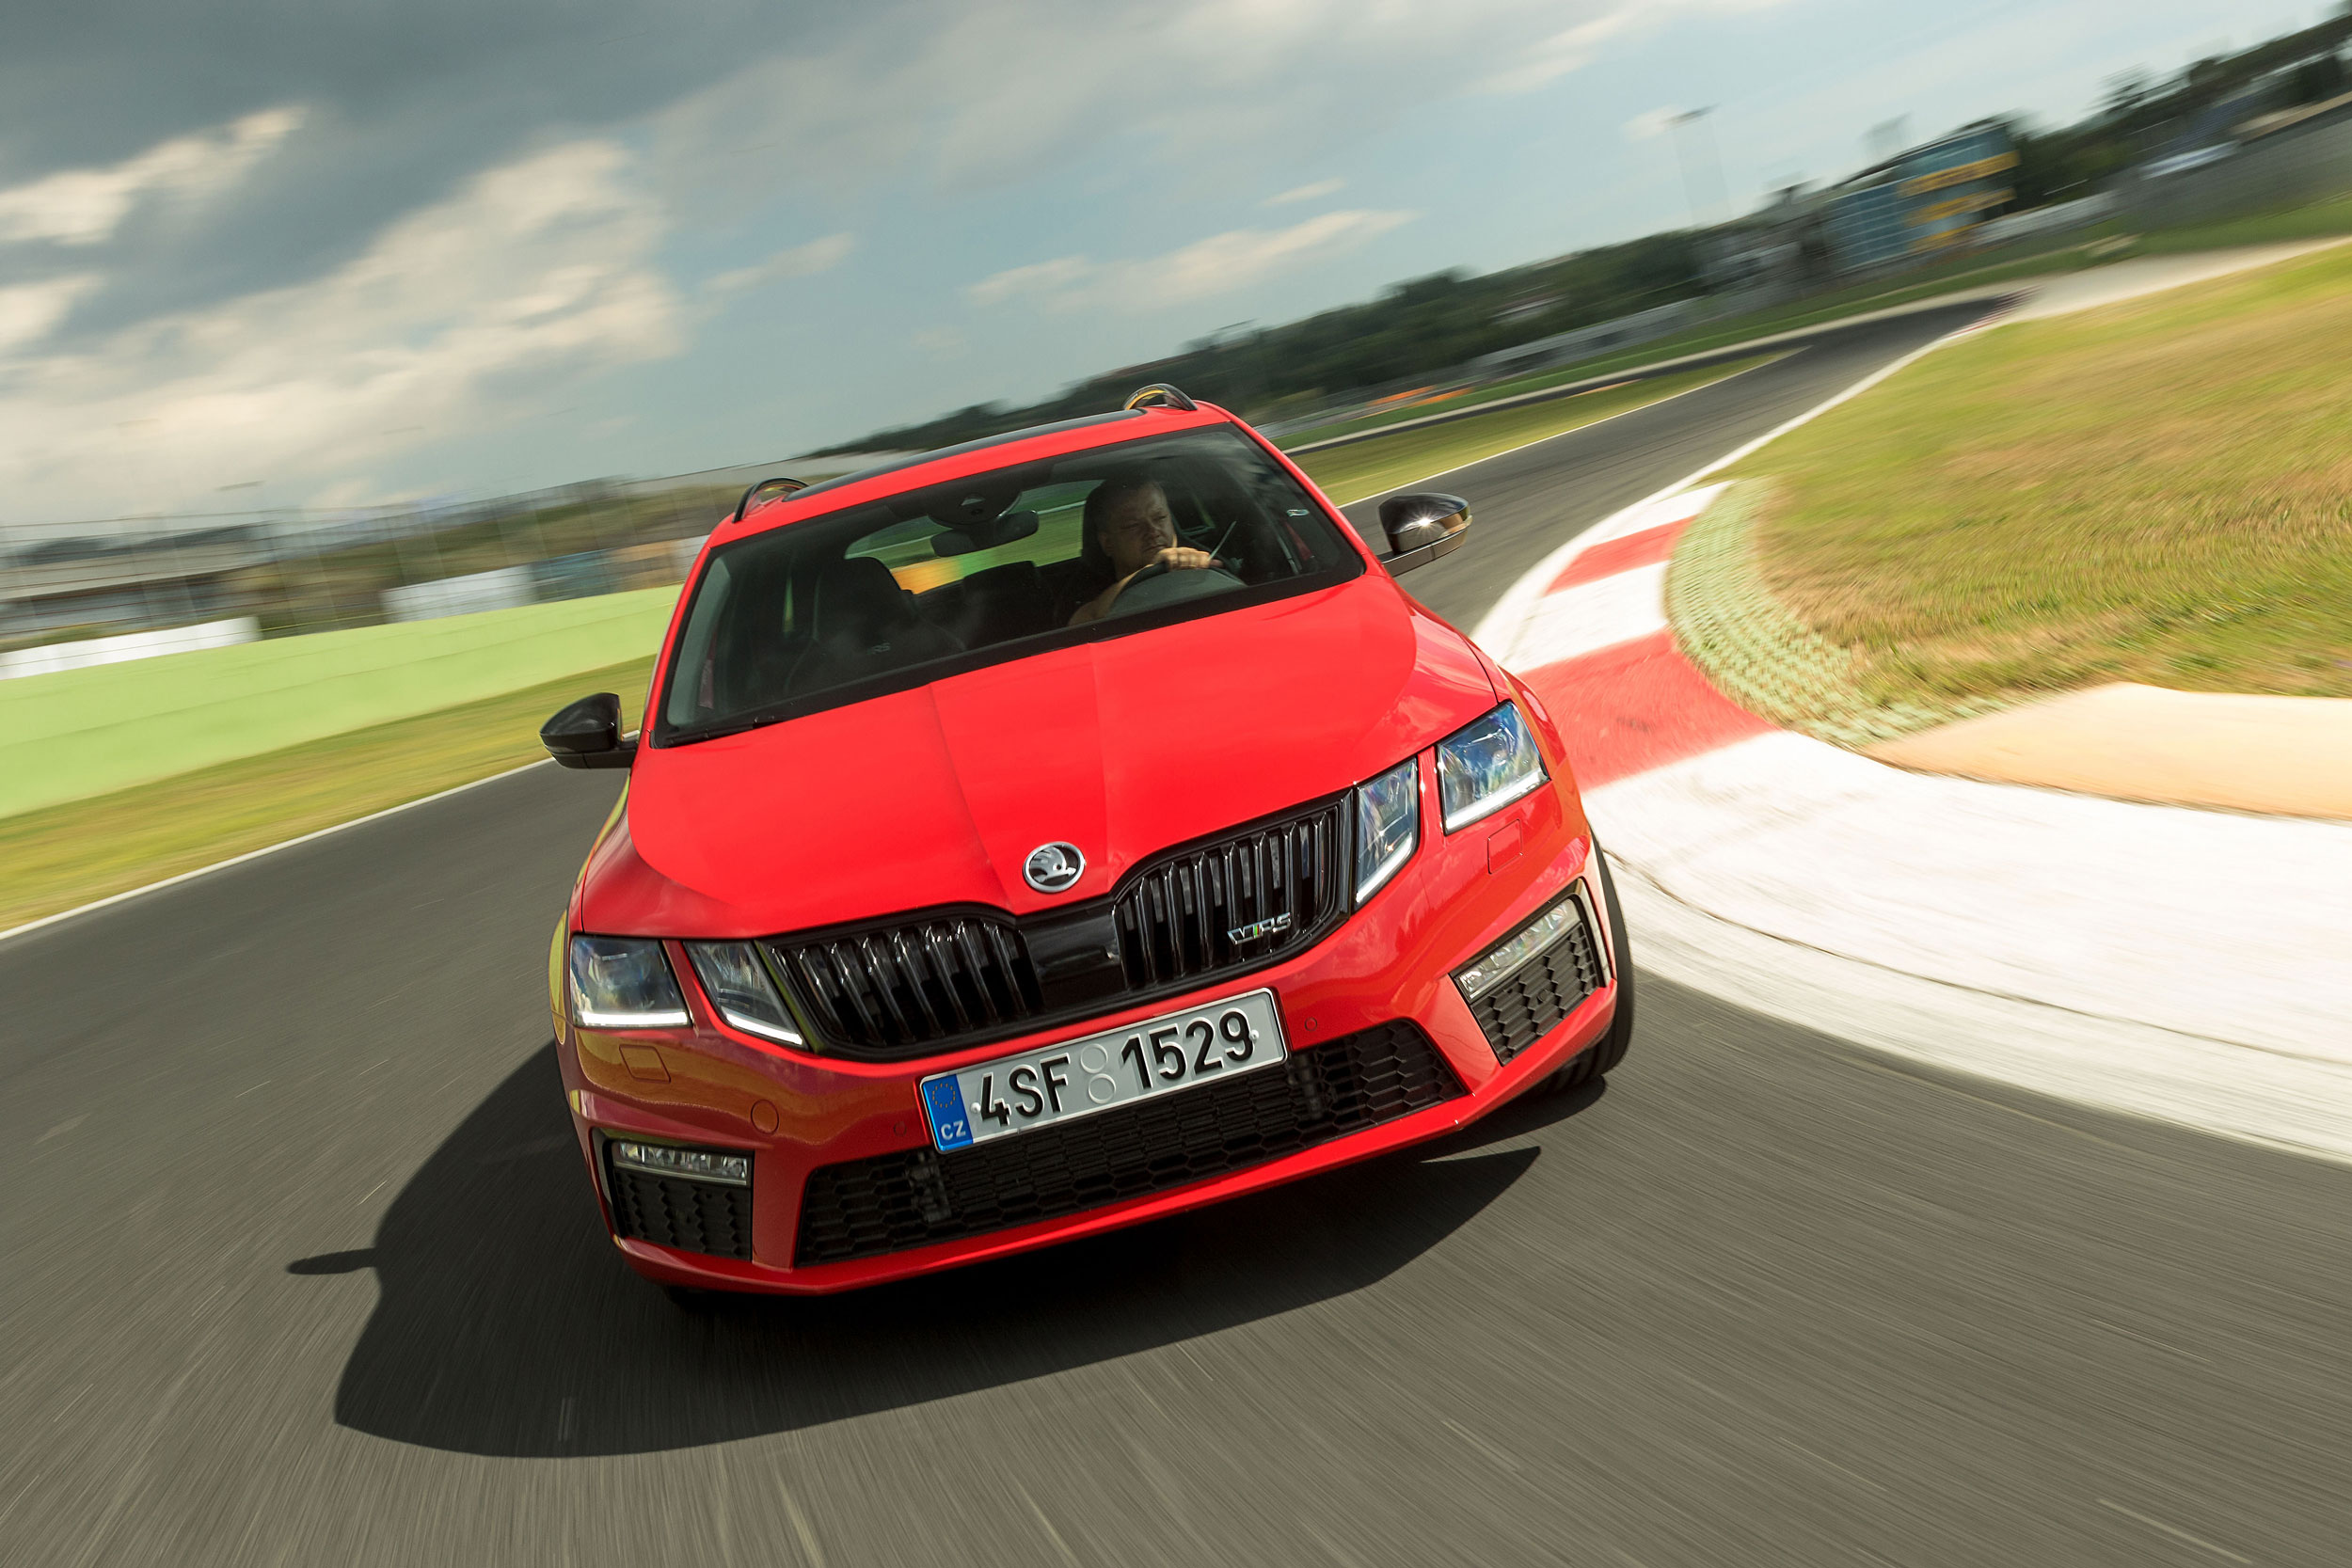 Skoda Octavia vRS review - prices, specs and 0-60 time